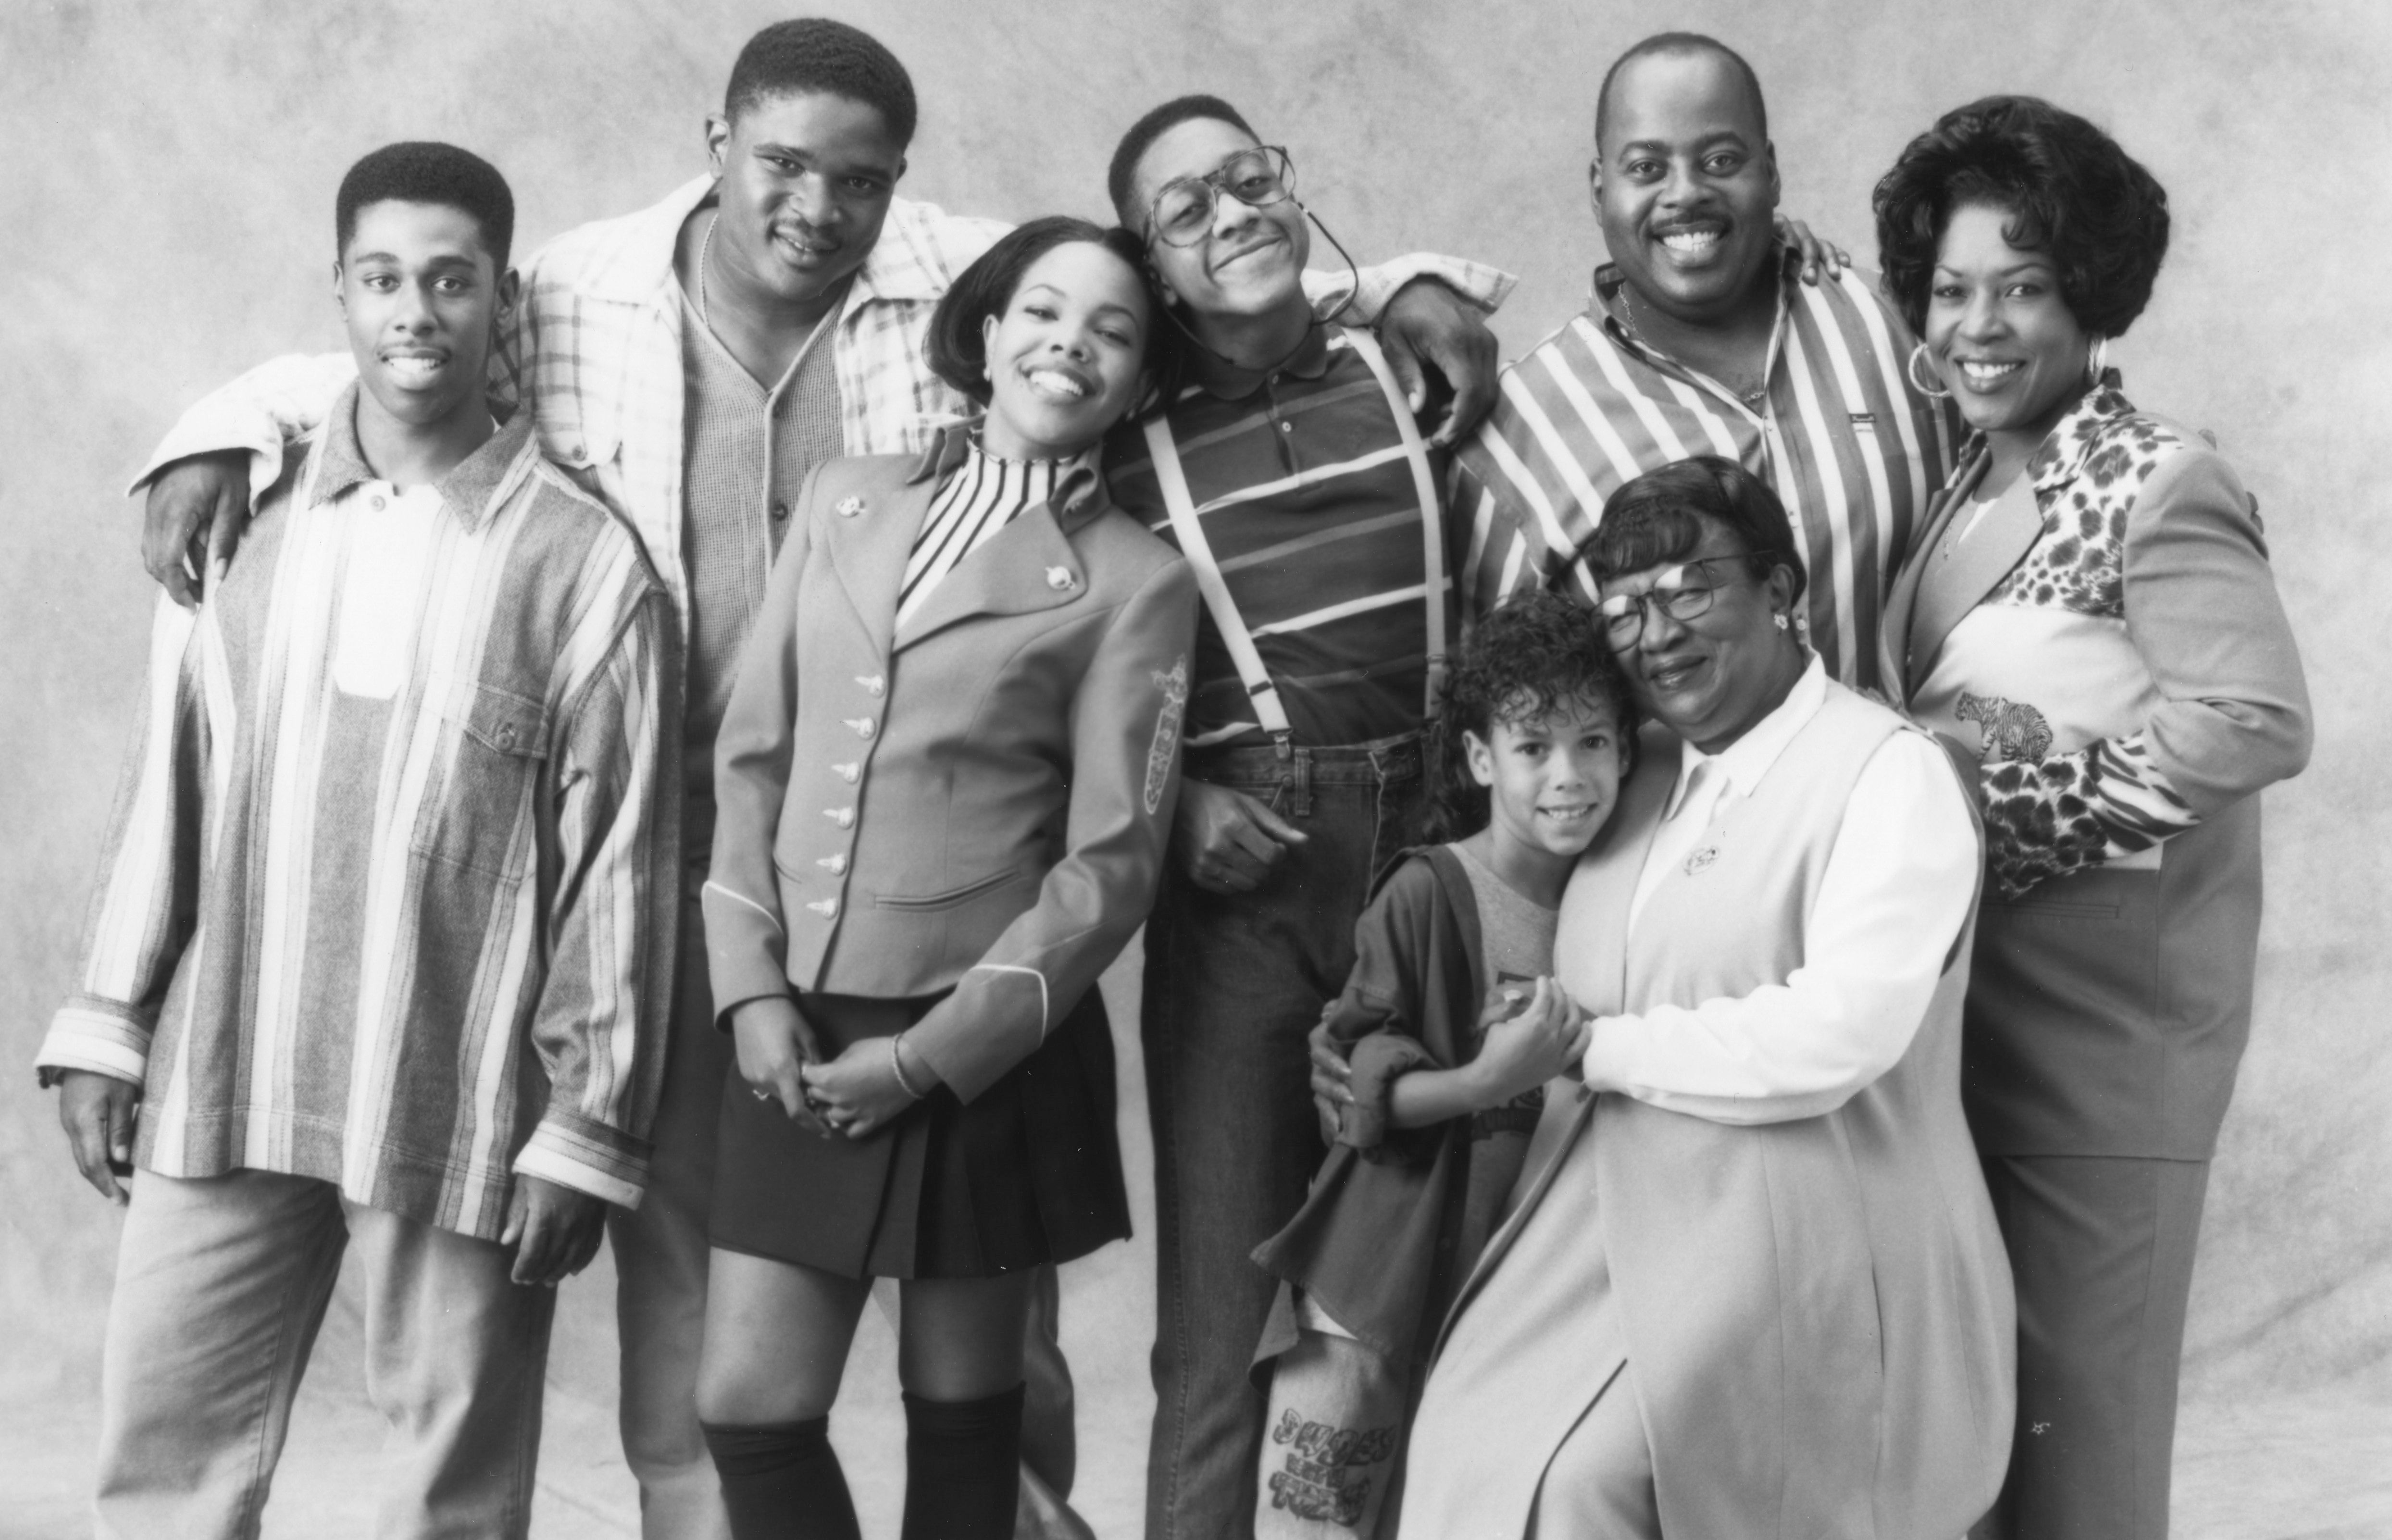 Cast of the 90s sitcom, "Family Matters" pose for a portrait on August 8, 1994. | Photo: Getty Images